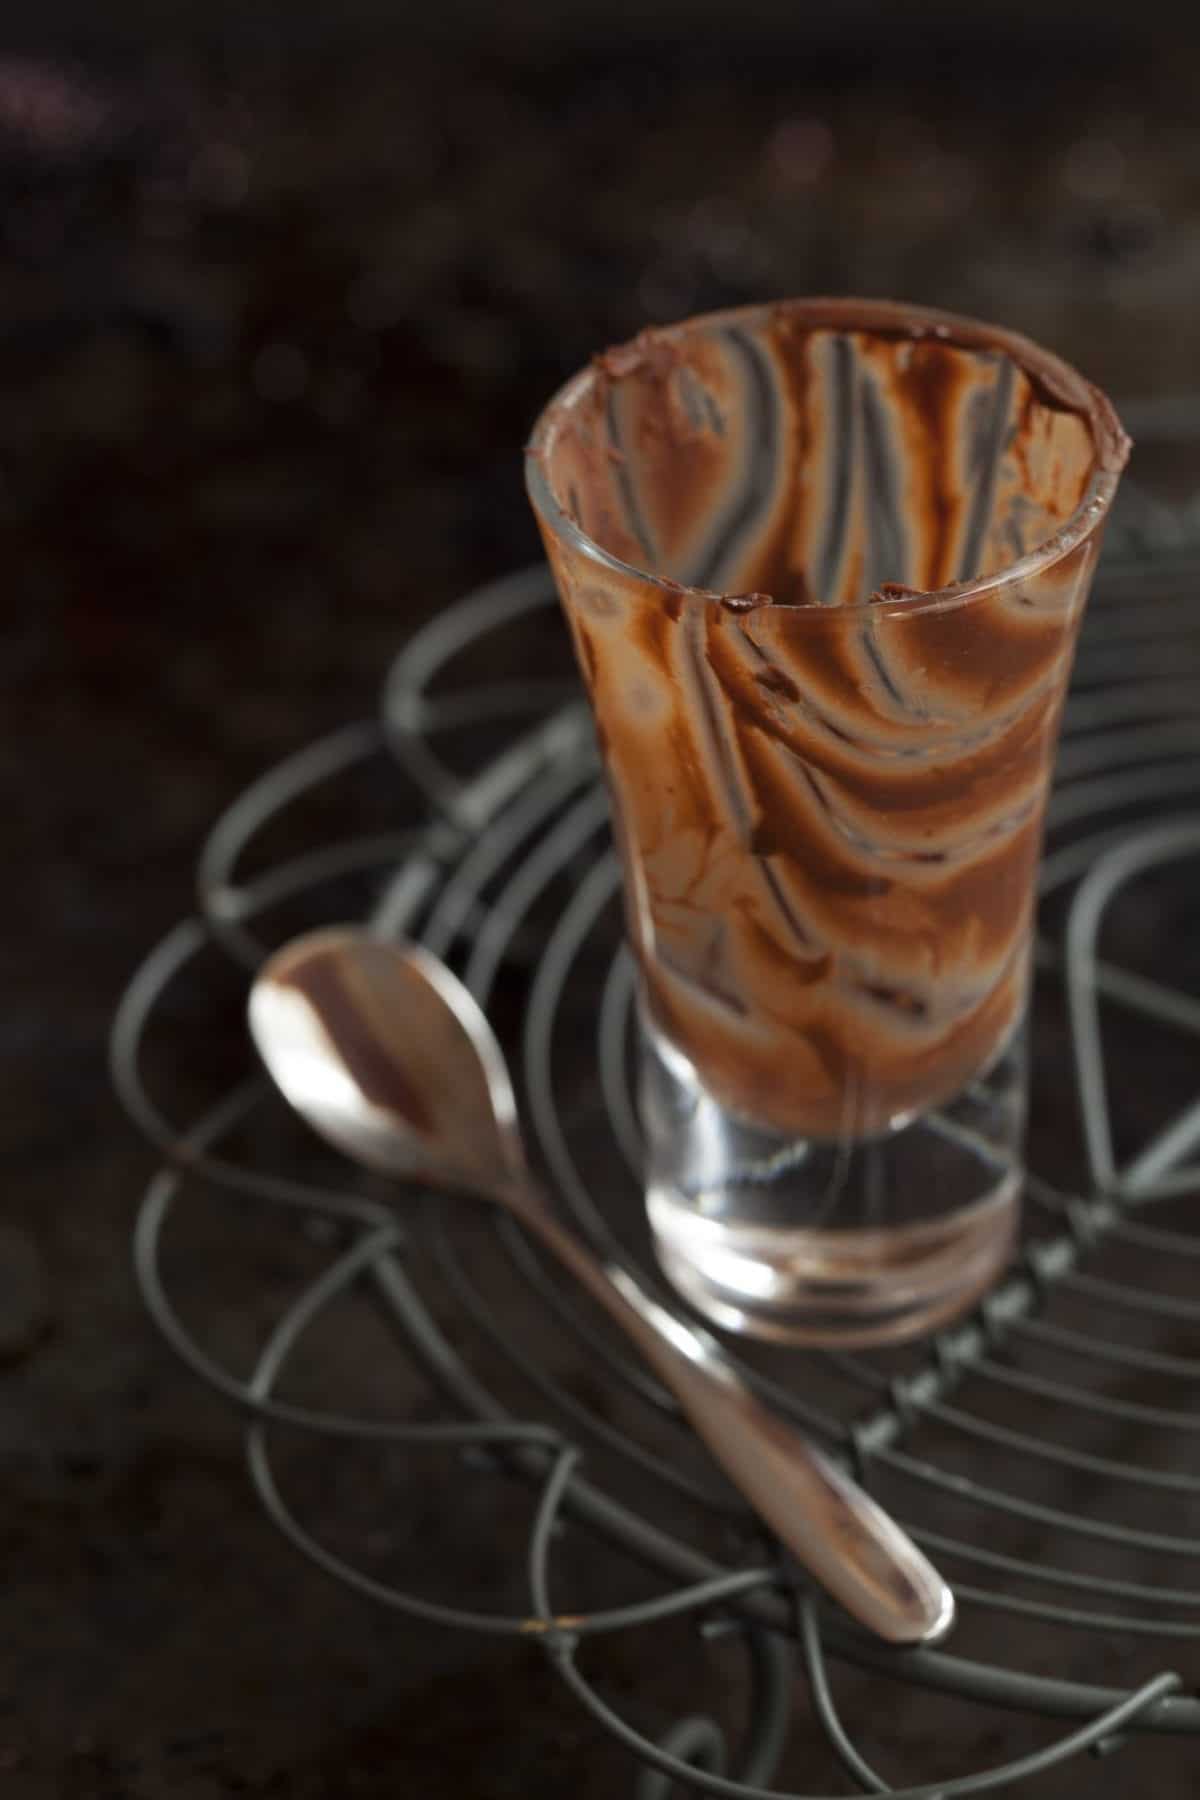 Empty glass containing the remains of a chocolate dessert